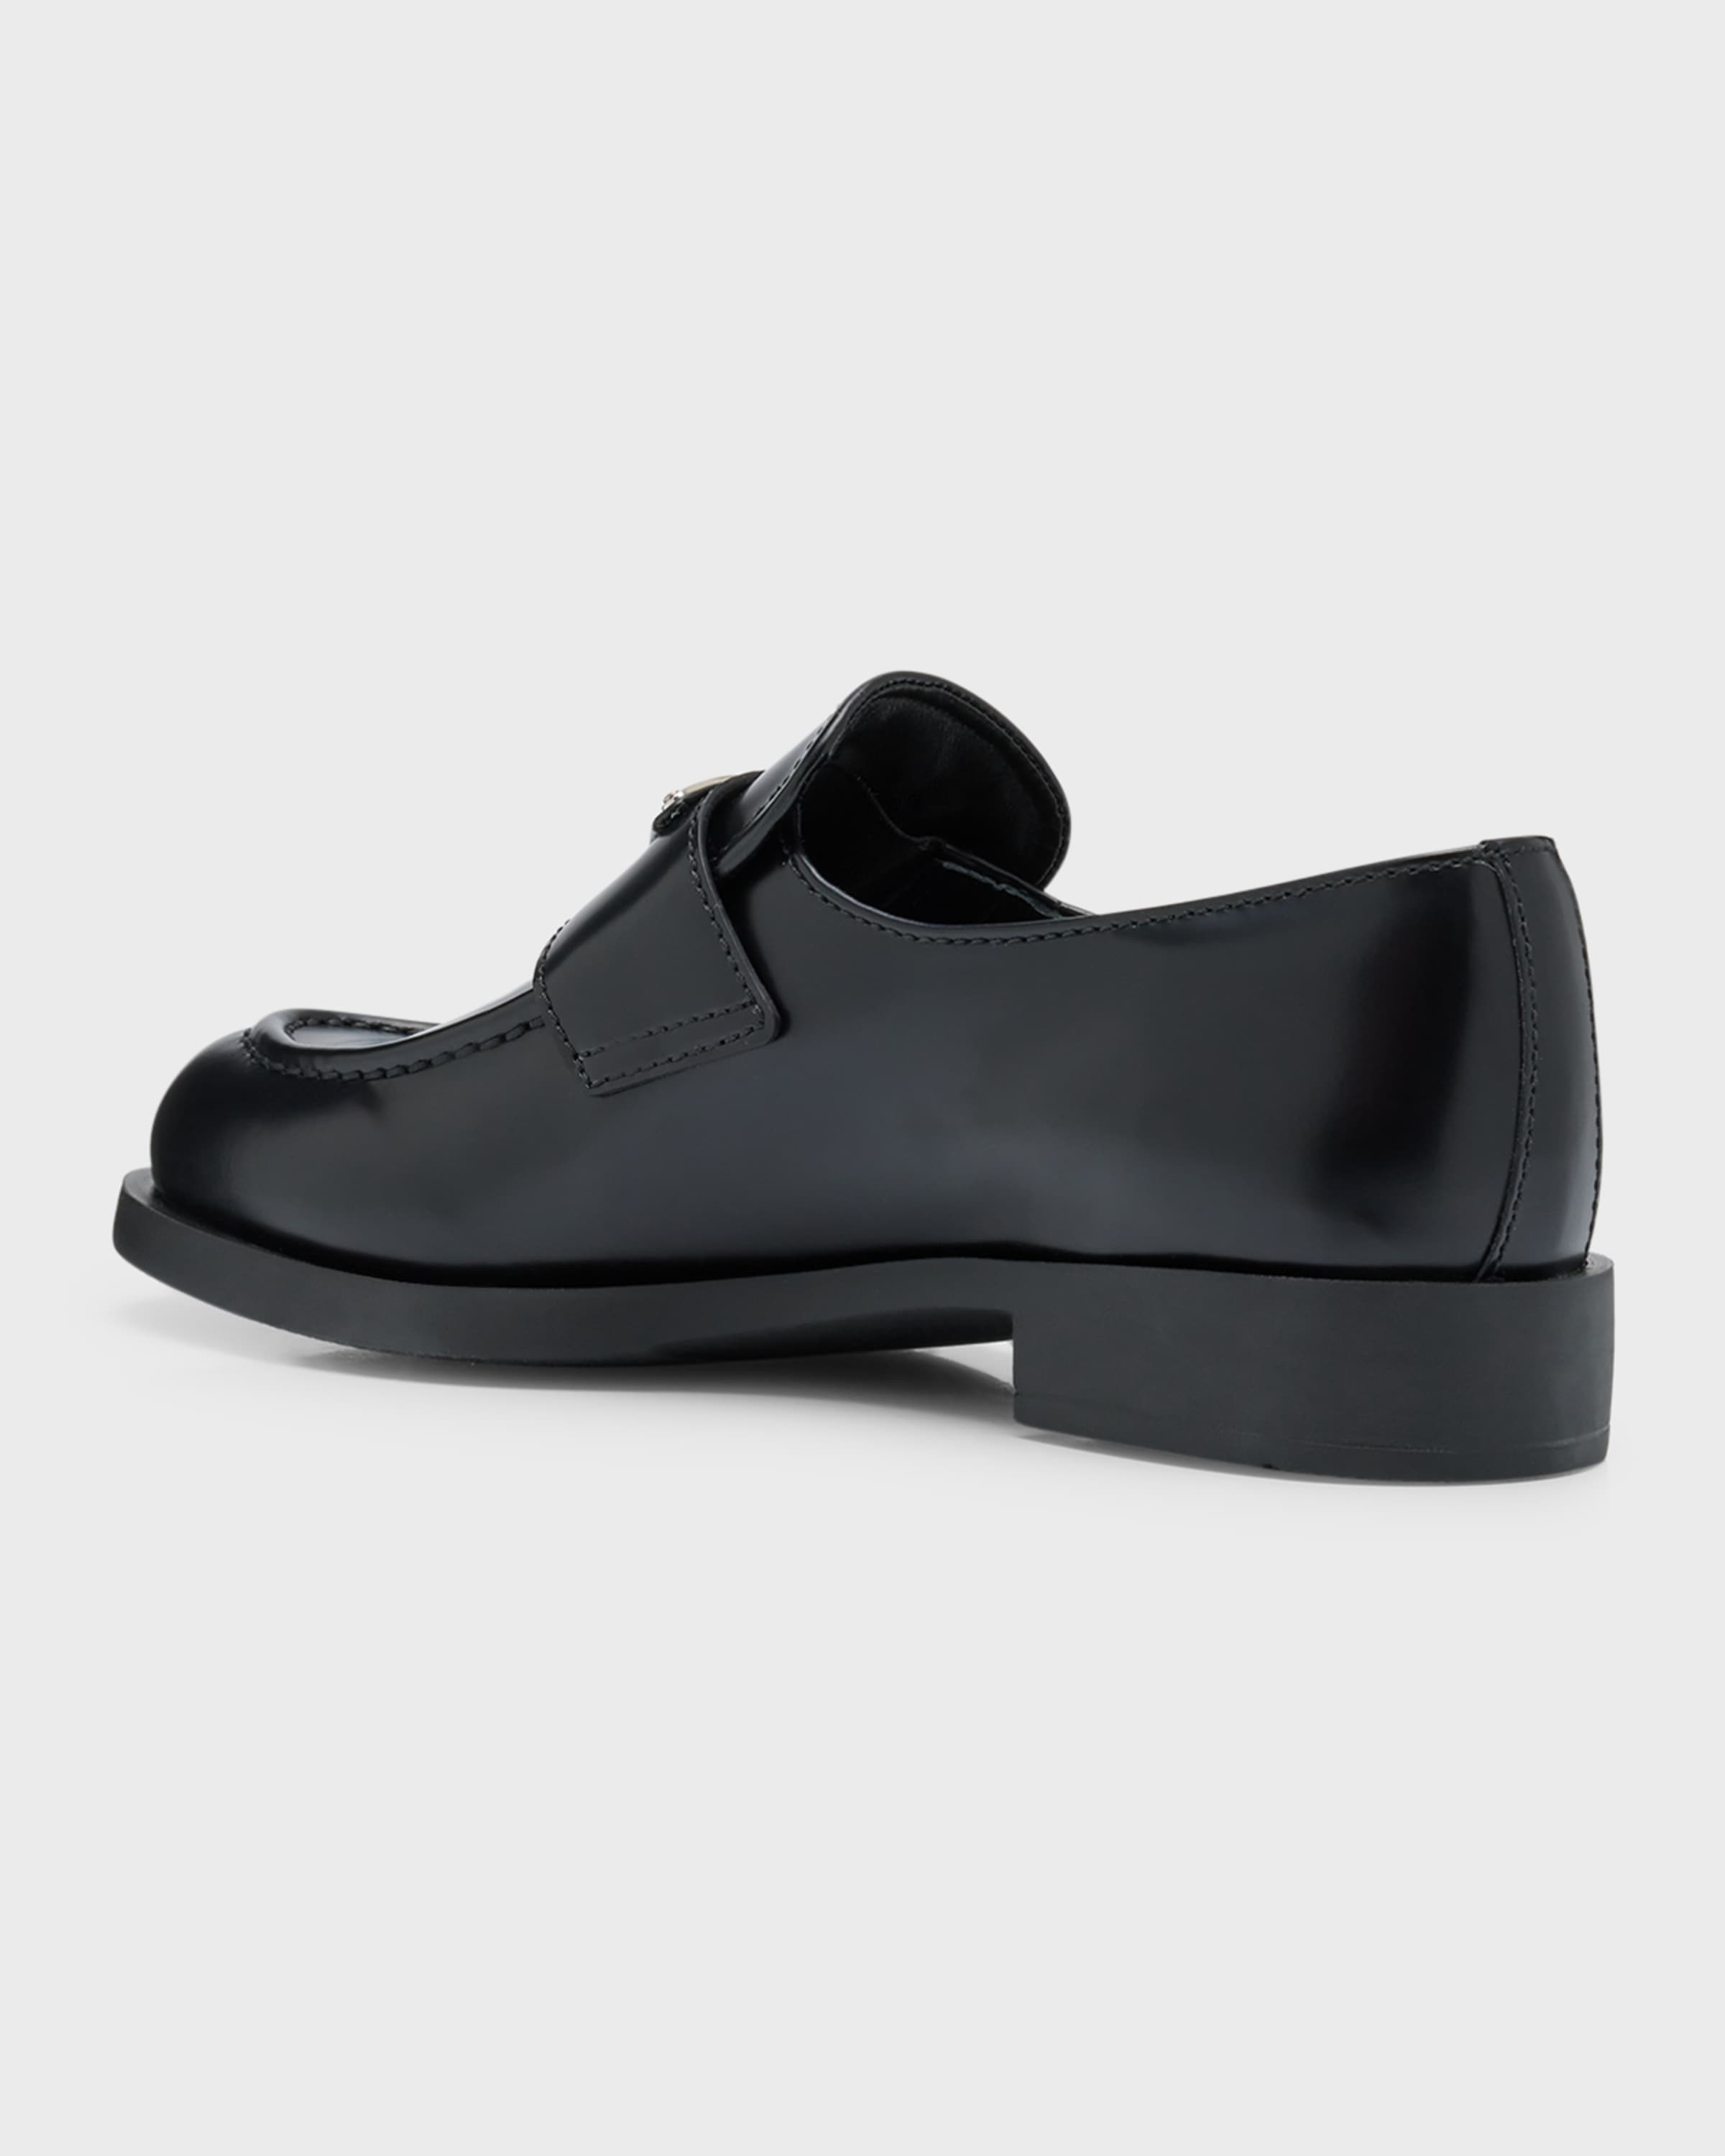 Leather Slip-On Flat Loafers - 4